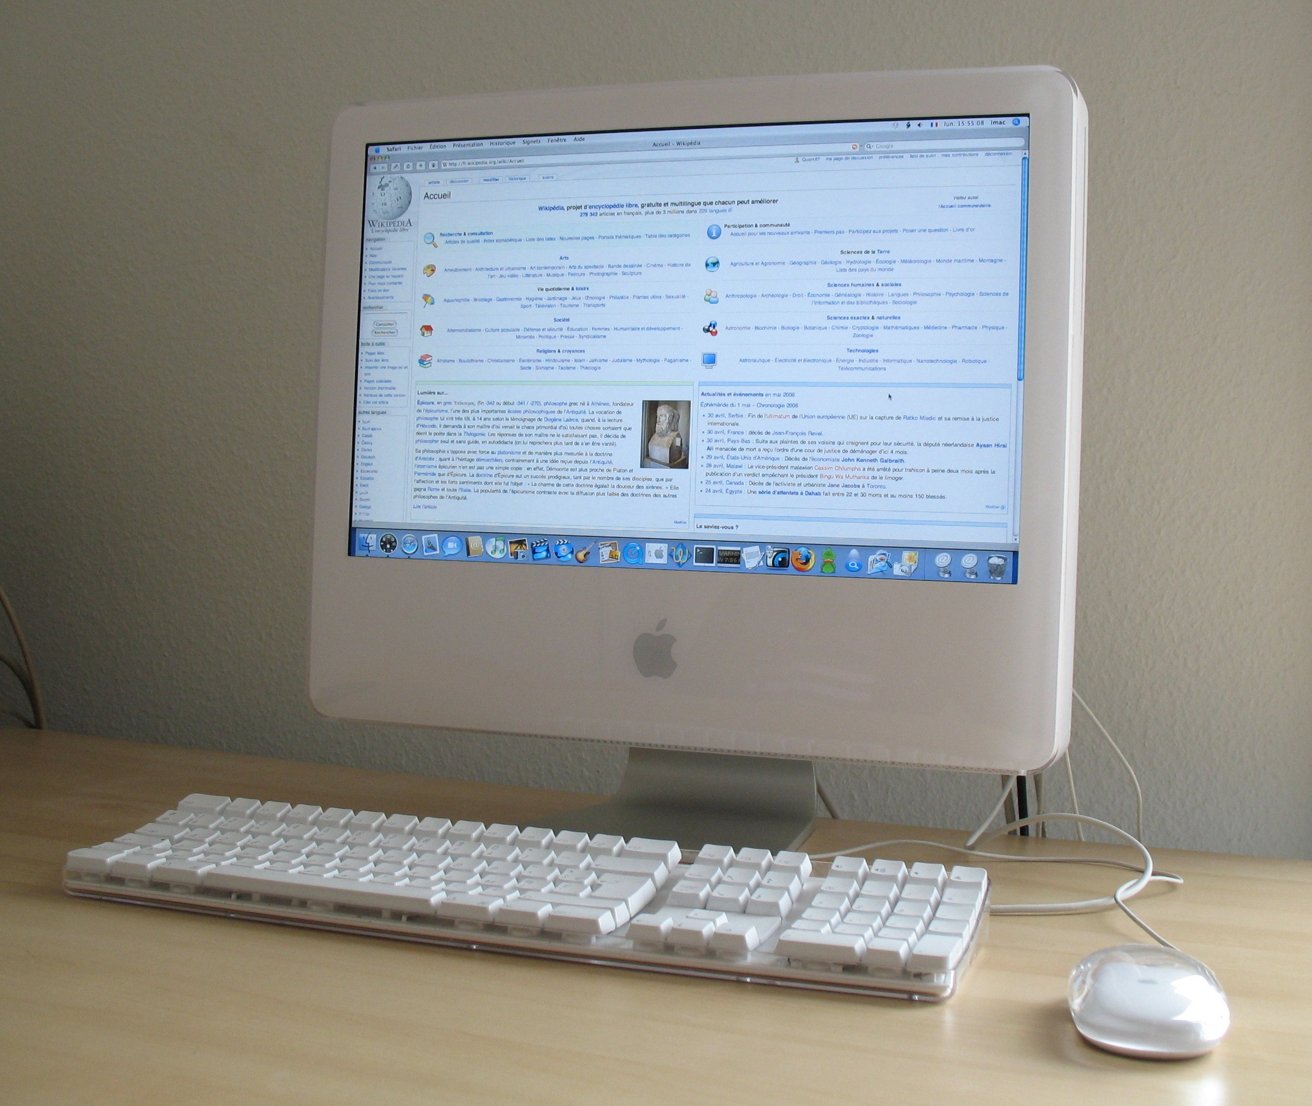 The 20-year-old iMac G5 looks unmistakably like today's iMac